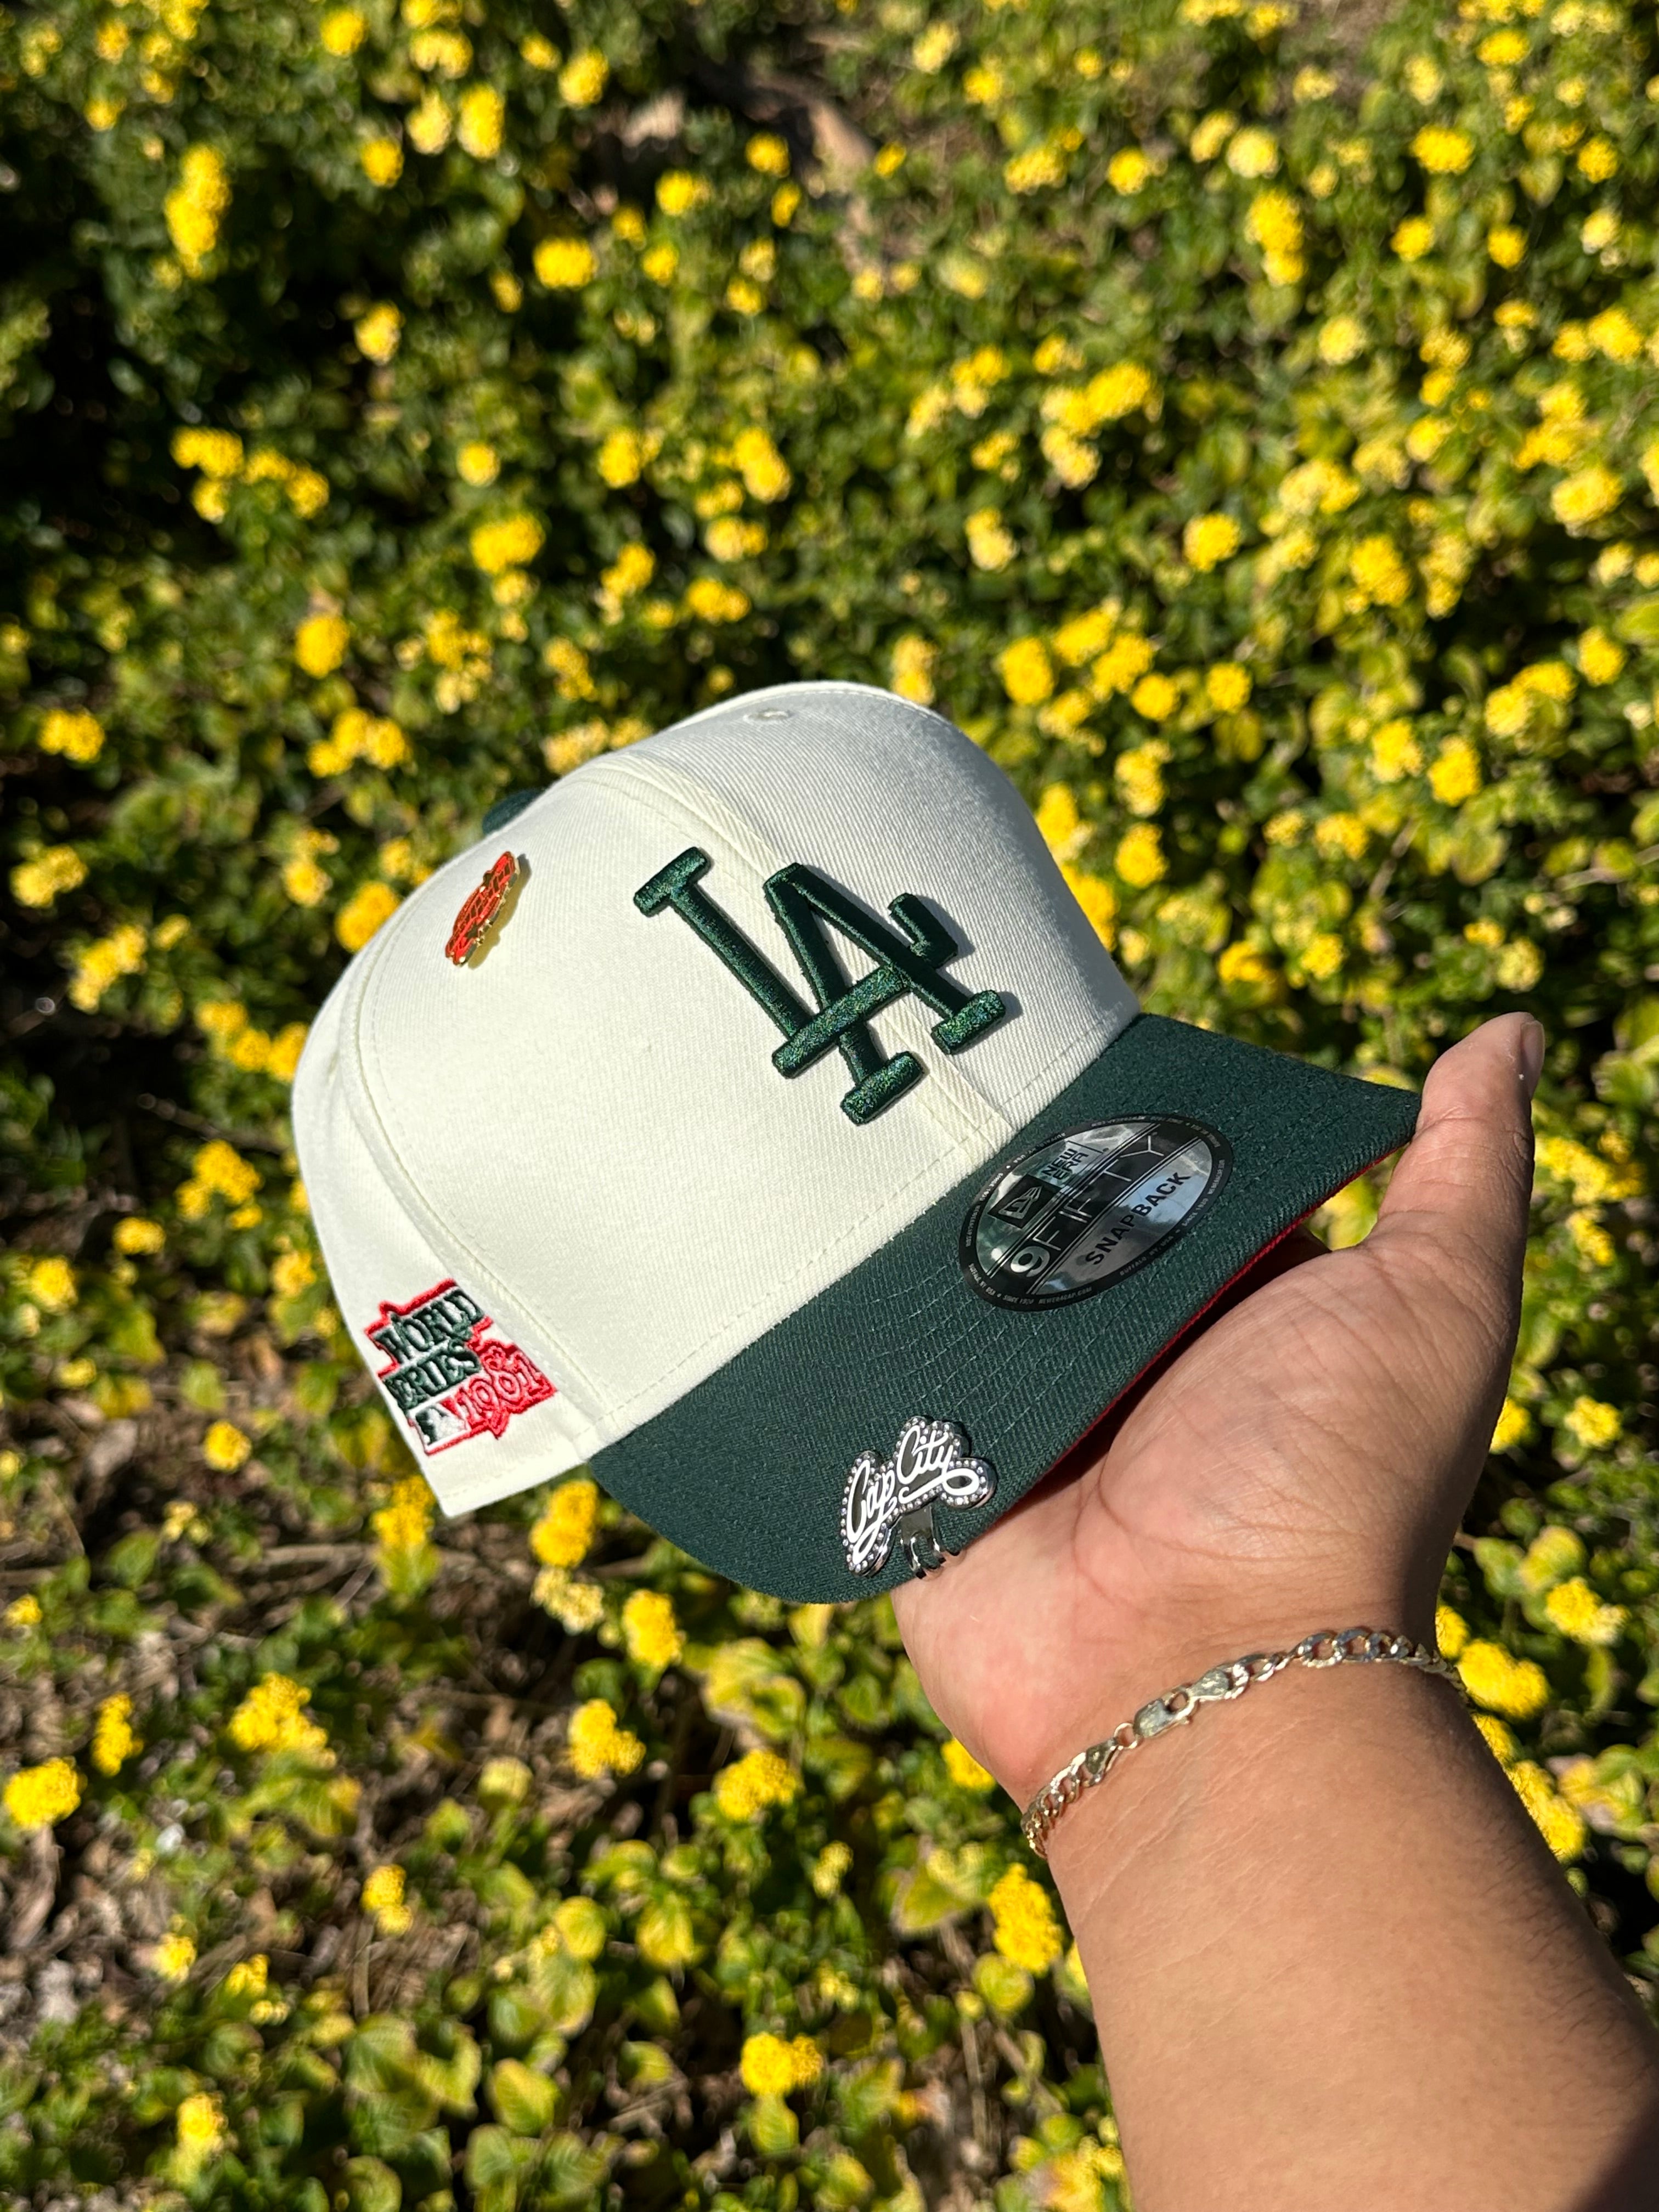 NEW ERA EXCLUSIVE 9FIFTY CHROME WHITE/GREEN LOS ANGELES DODGERS SNAPBACK W/ 1981 WORLD SERIES PATCH